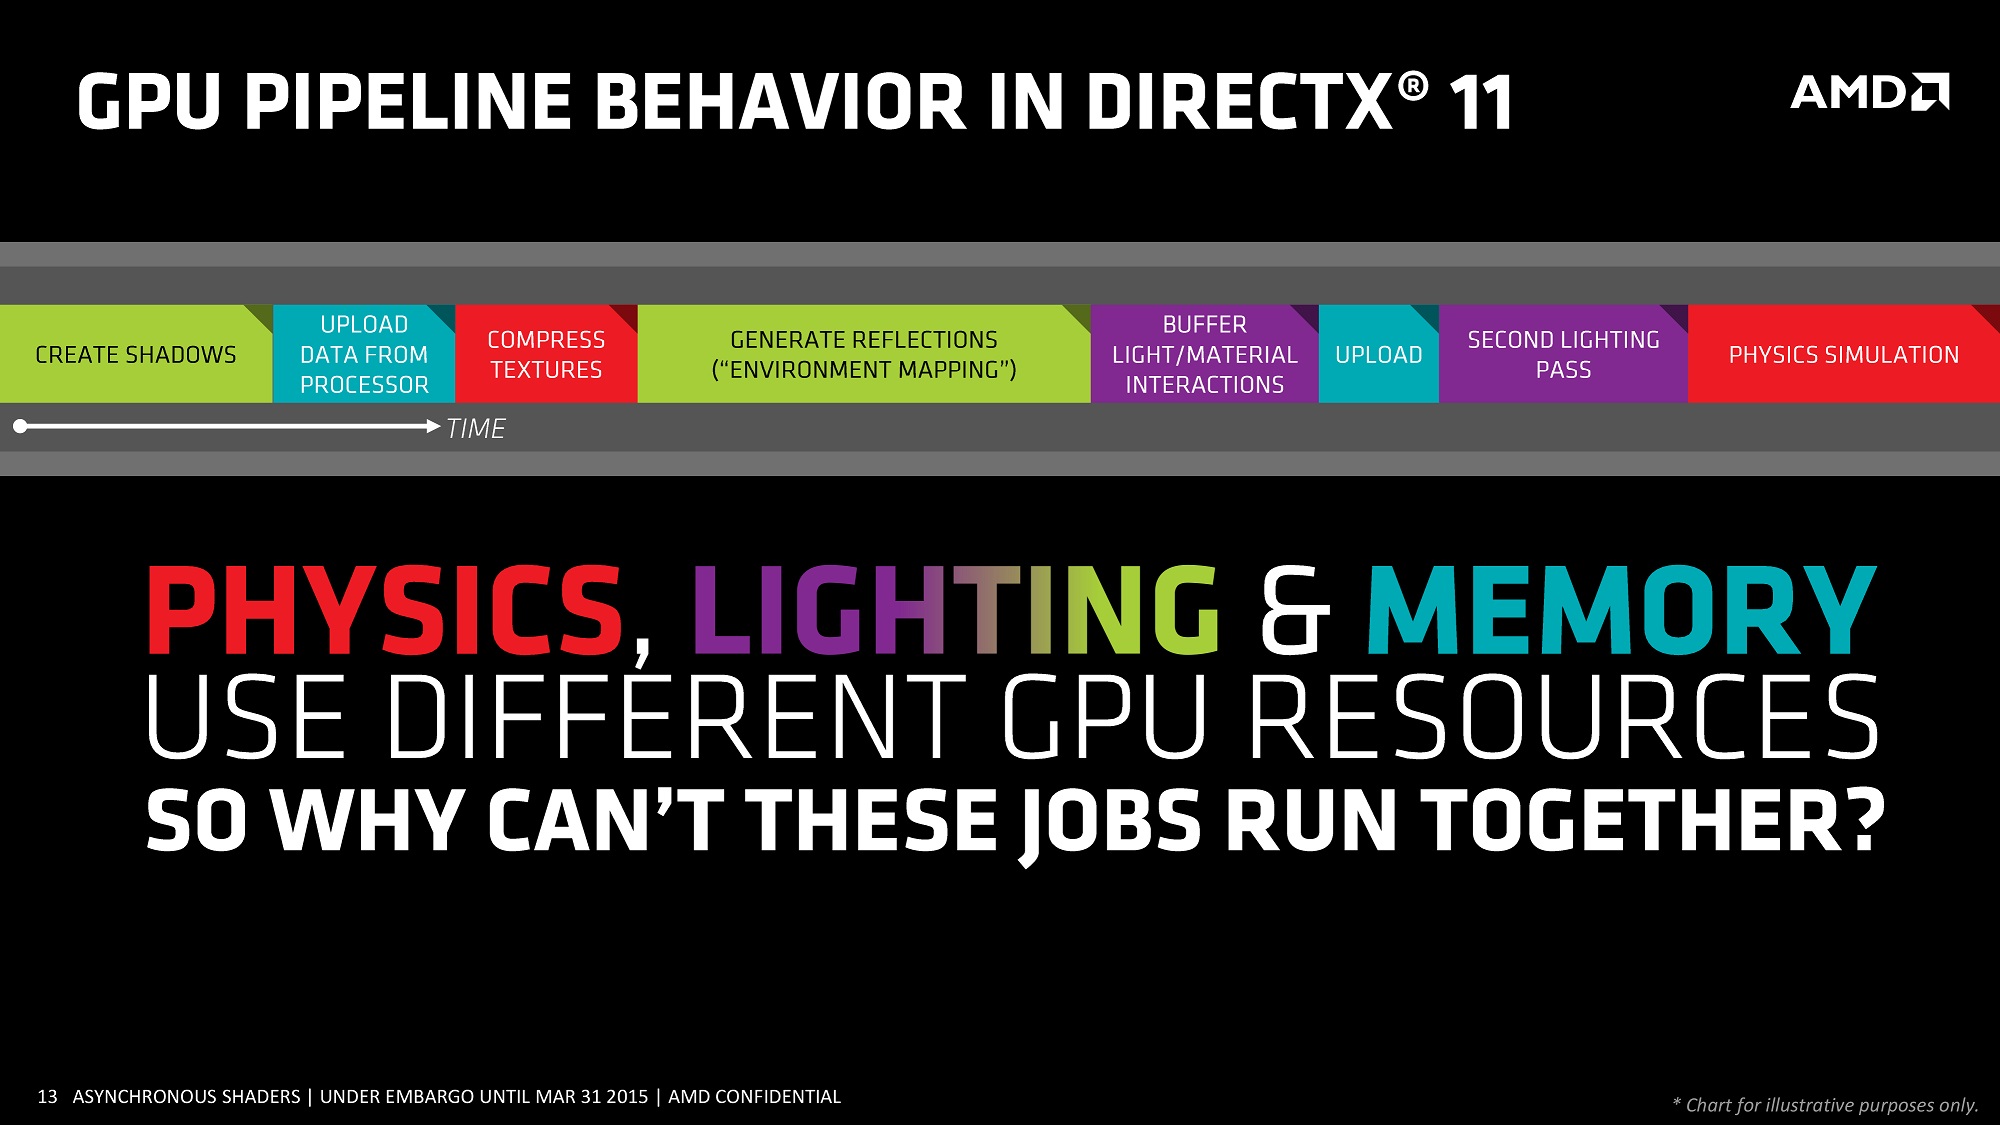 DirectX 12 vs. DirectX 11: which is better for PC gaming